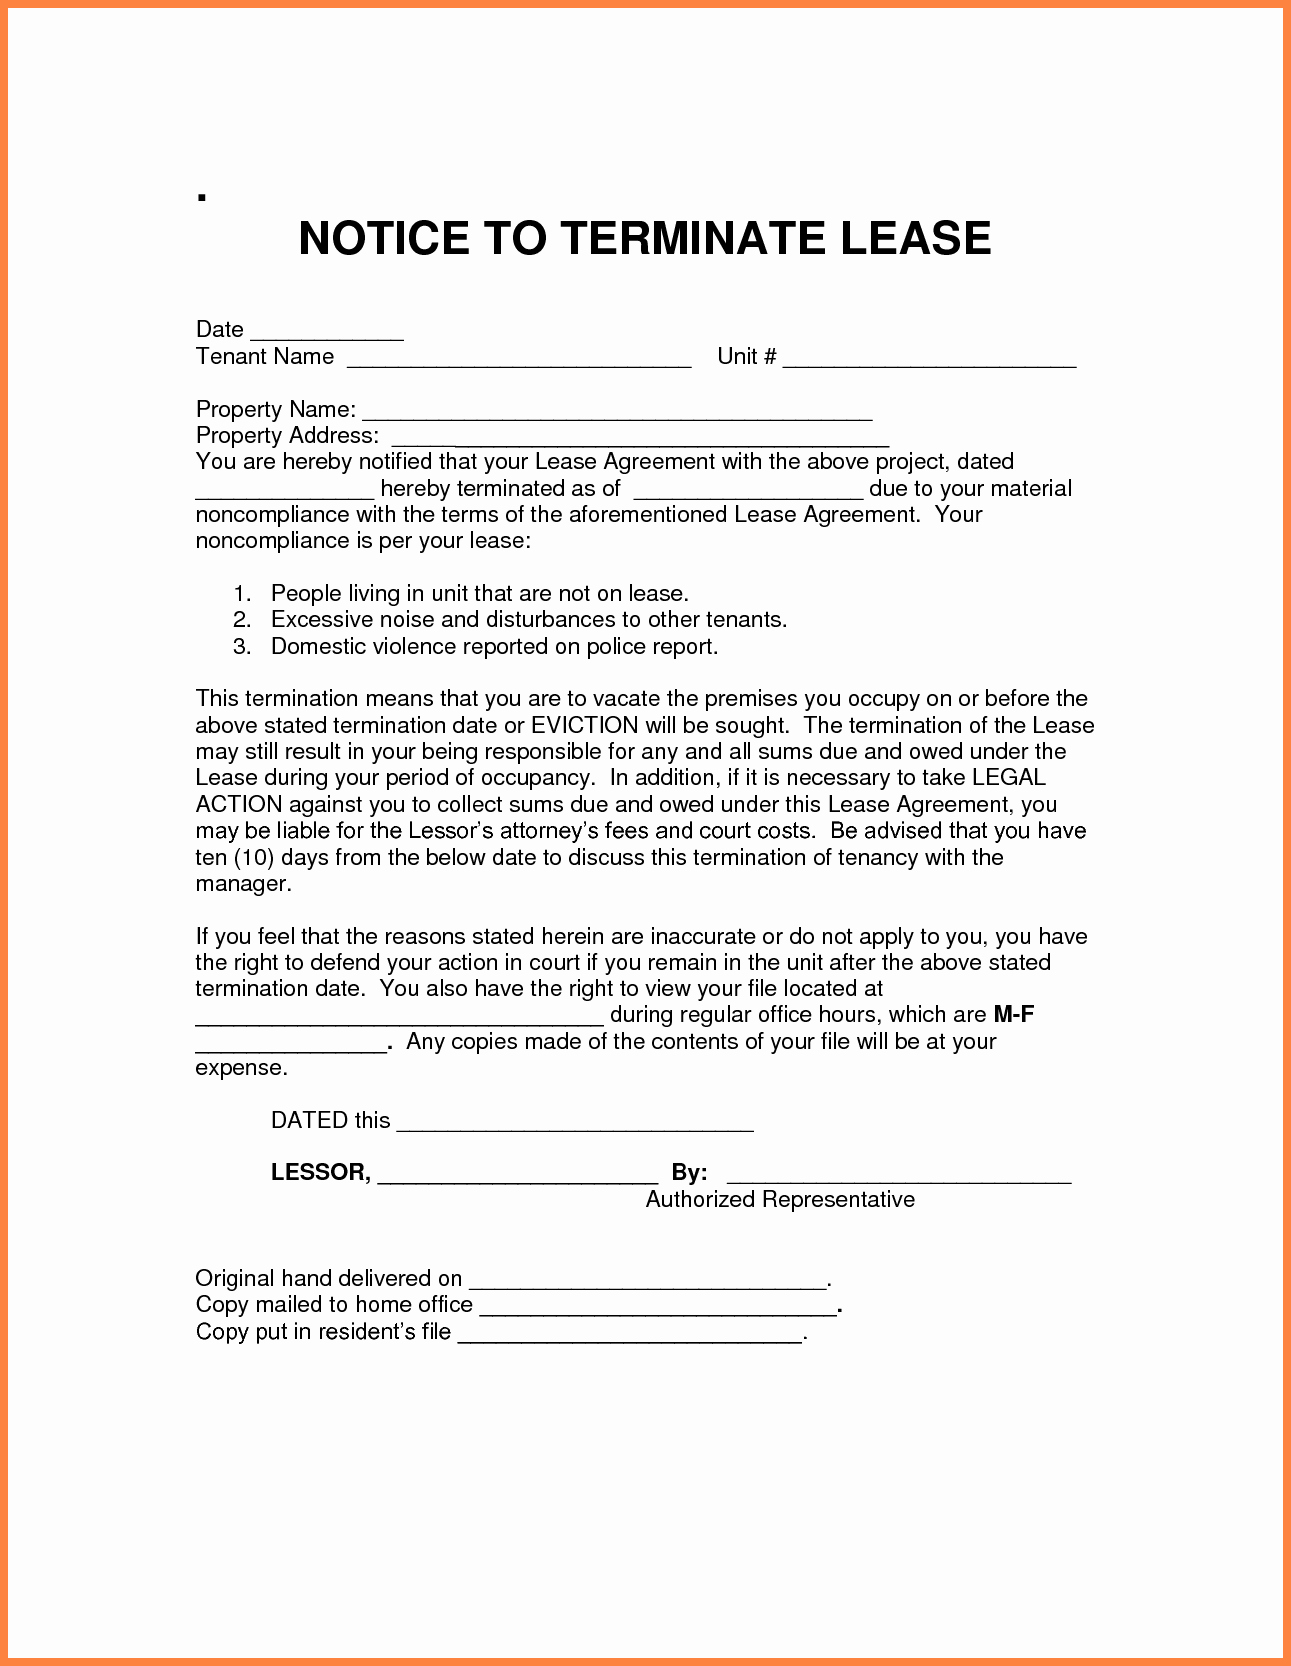 Lease Termination Agreement Template Awesome 7 Notice for Termination Of Rental Agreement